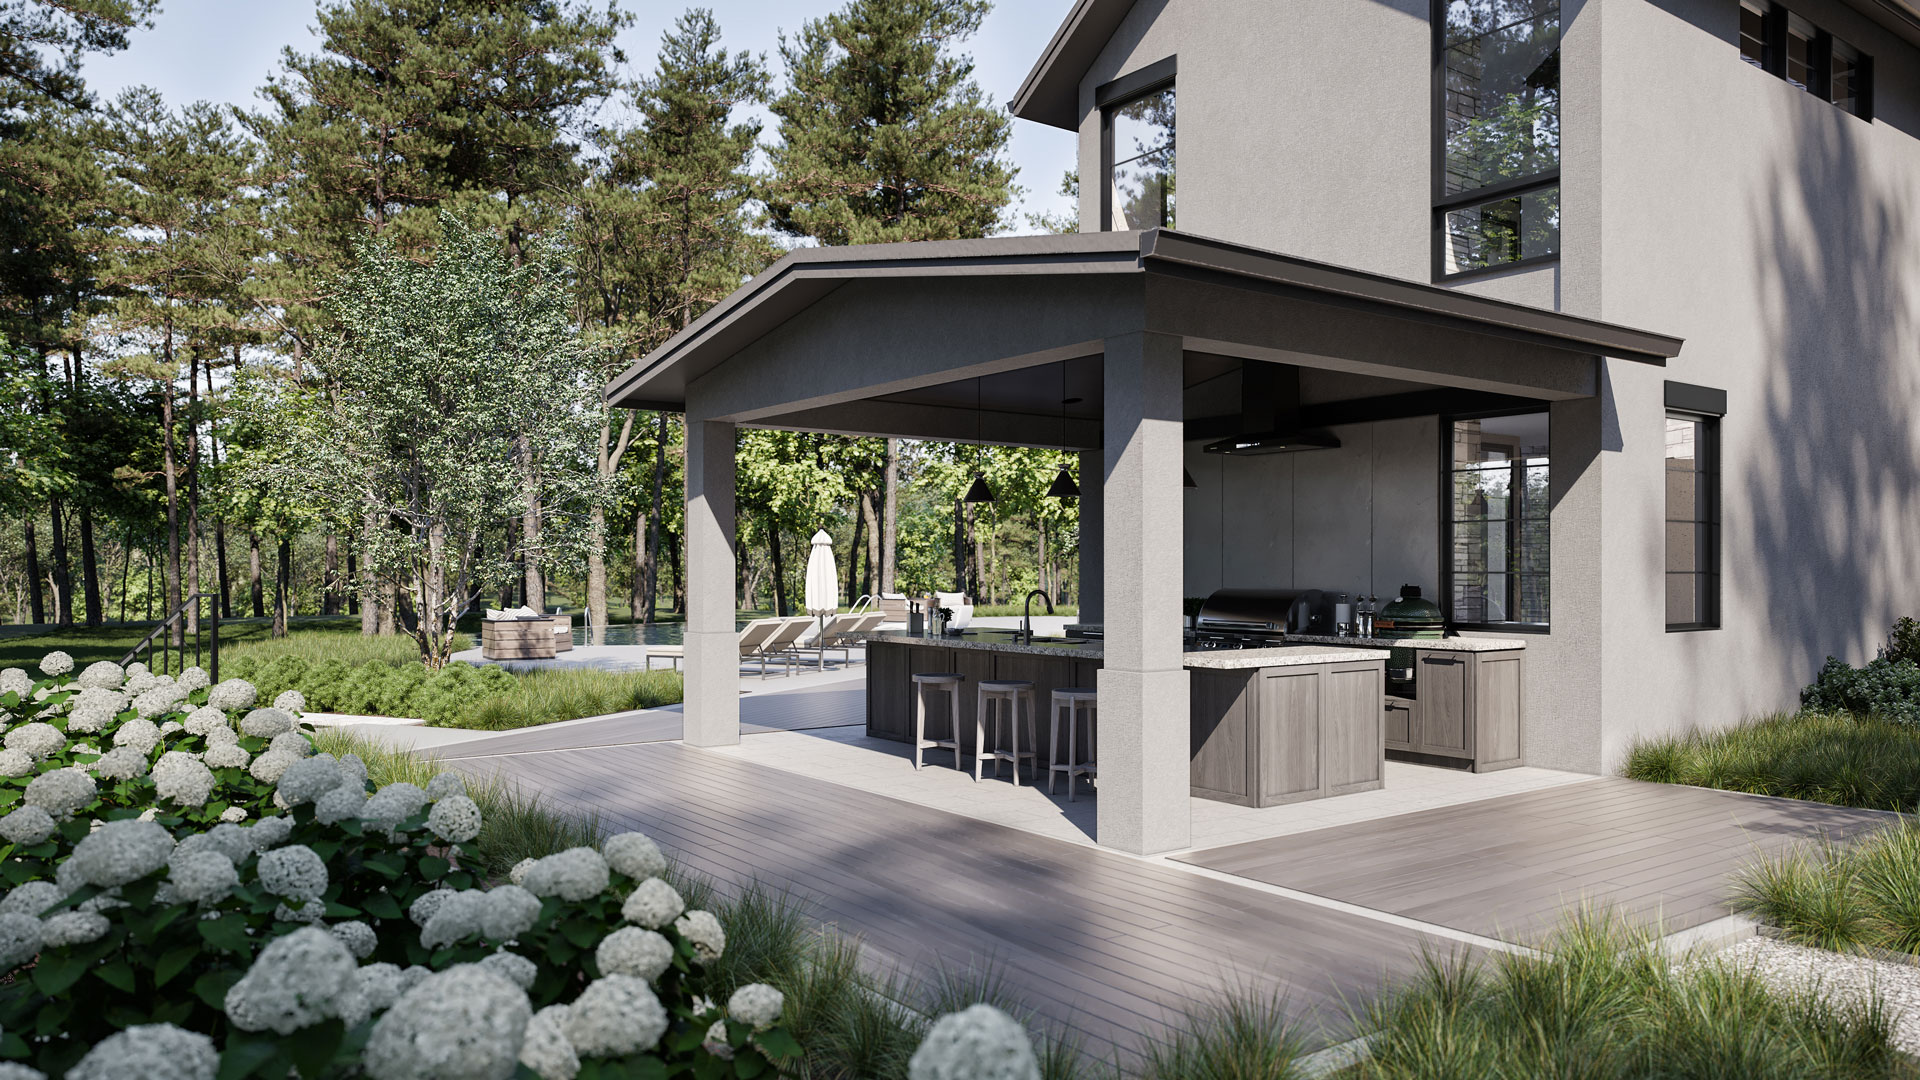 Exterior Renderings for a House in Georgia: Outdoor Kitchen and Garden